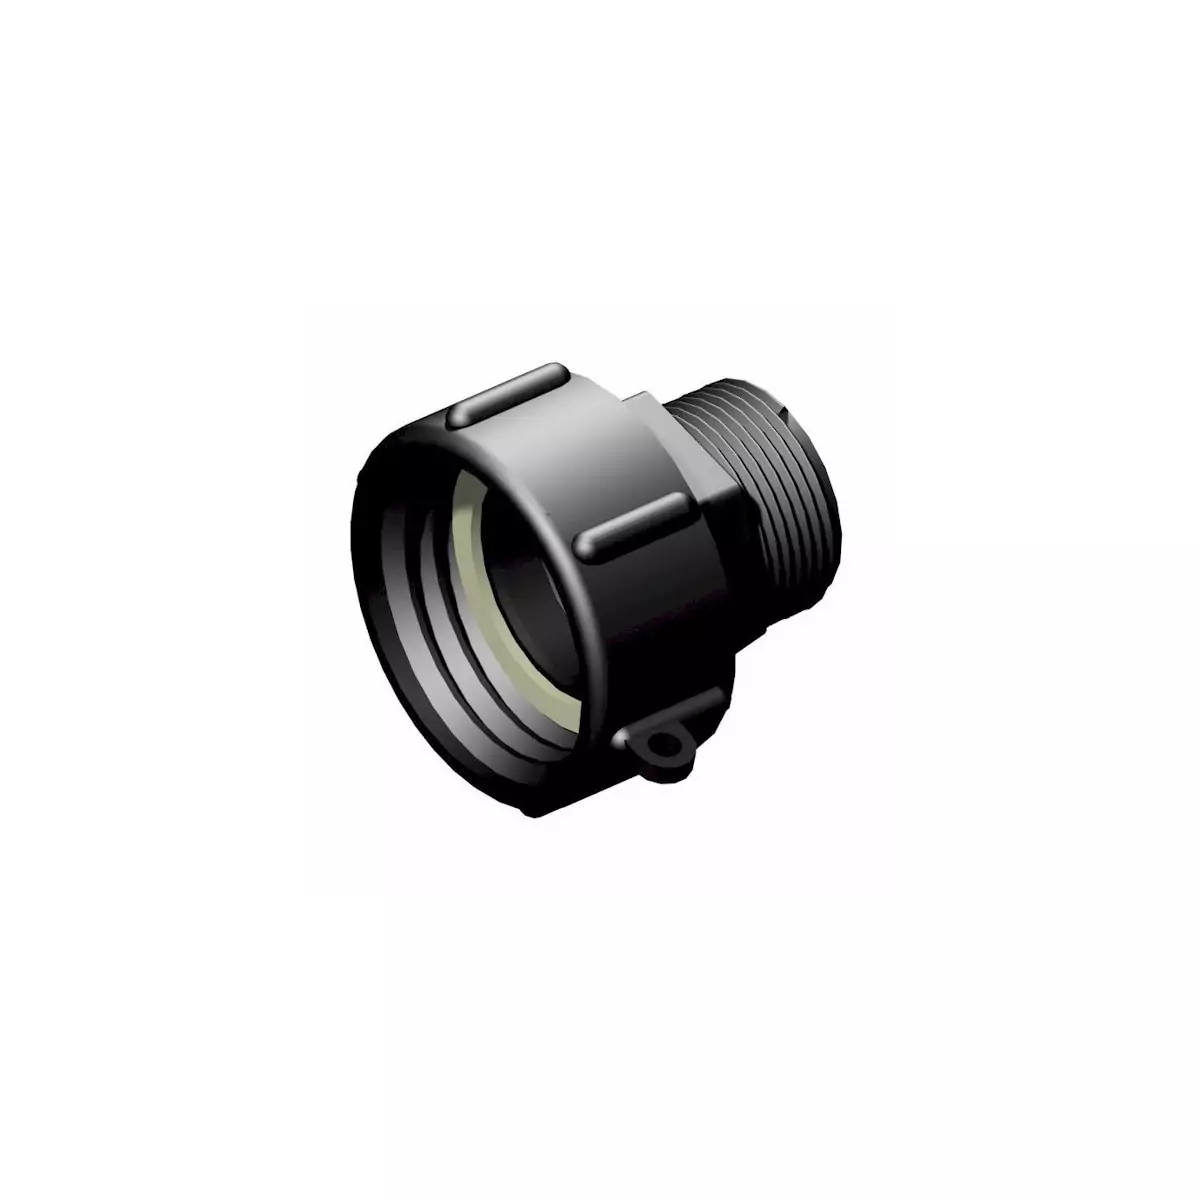 Product sheet 2 "S60x6 female connector - male 1-1 / 4", not gas